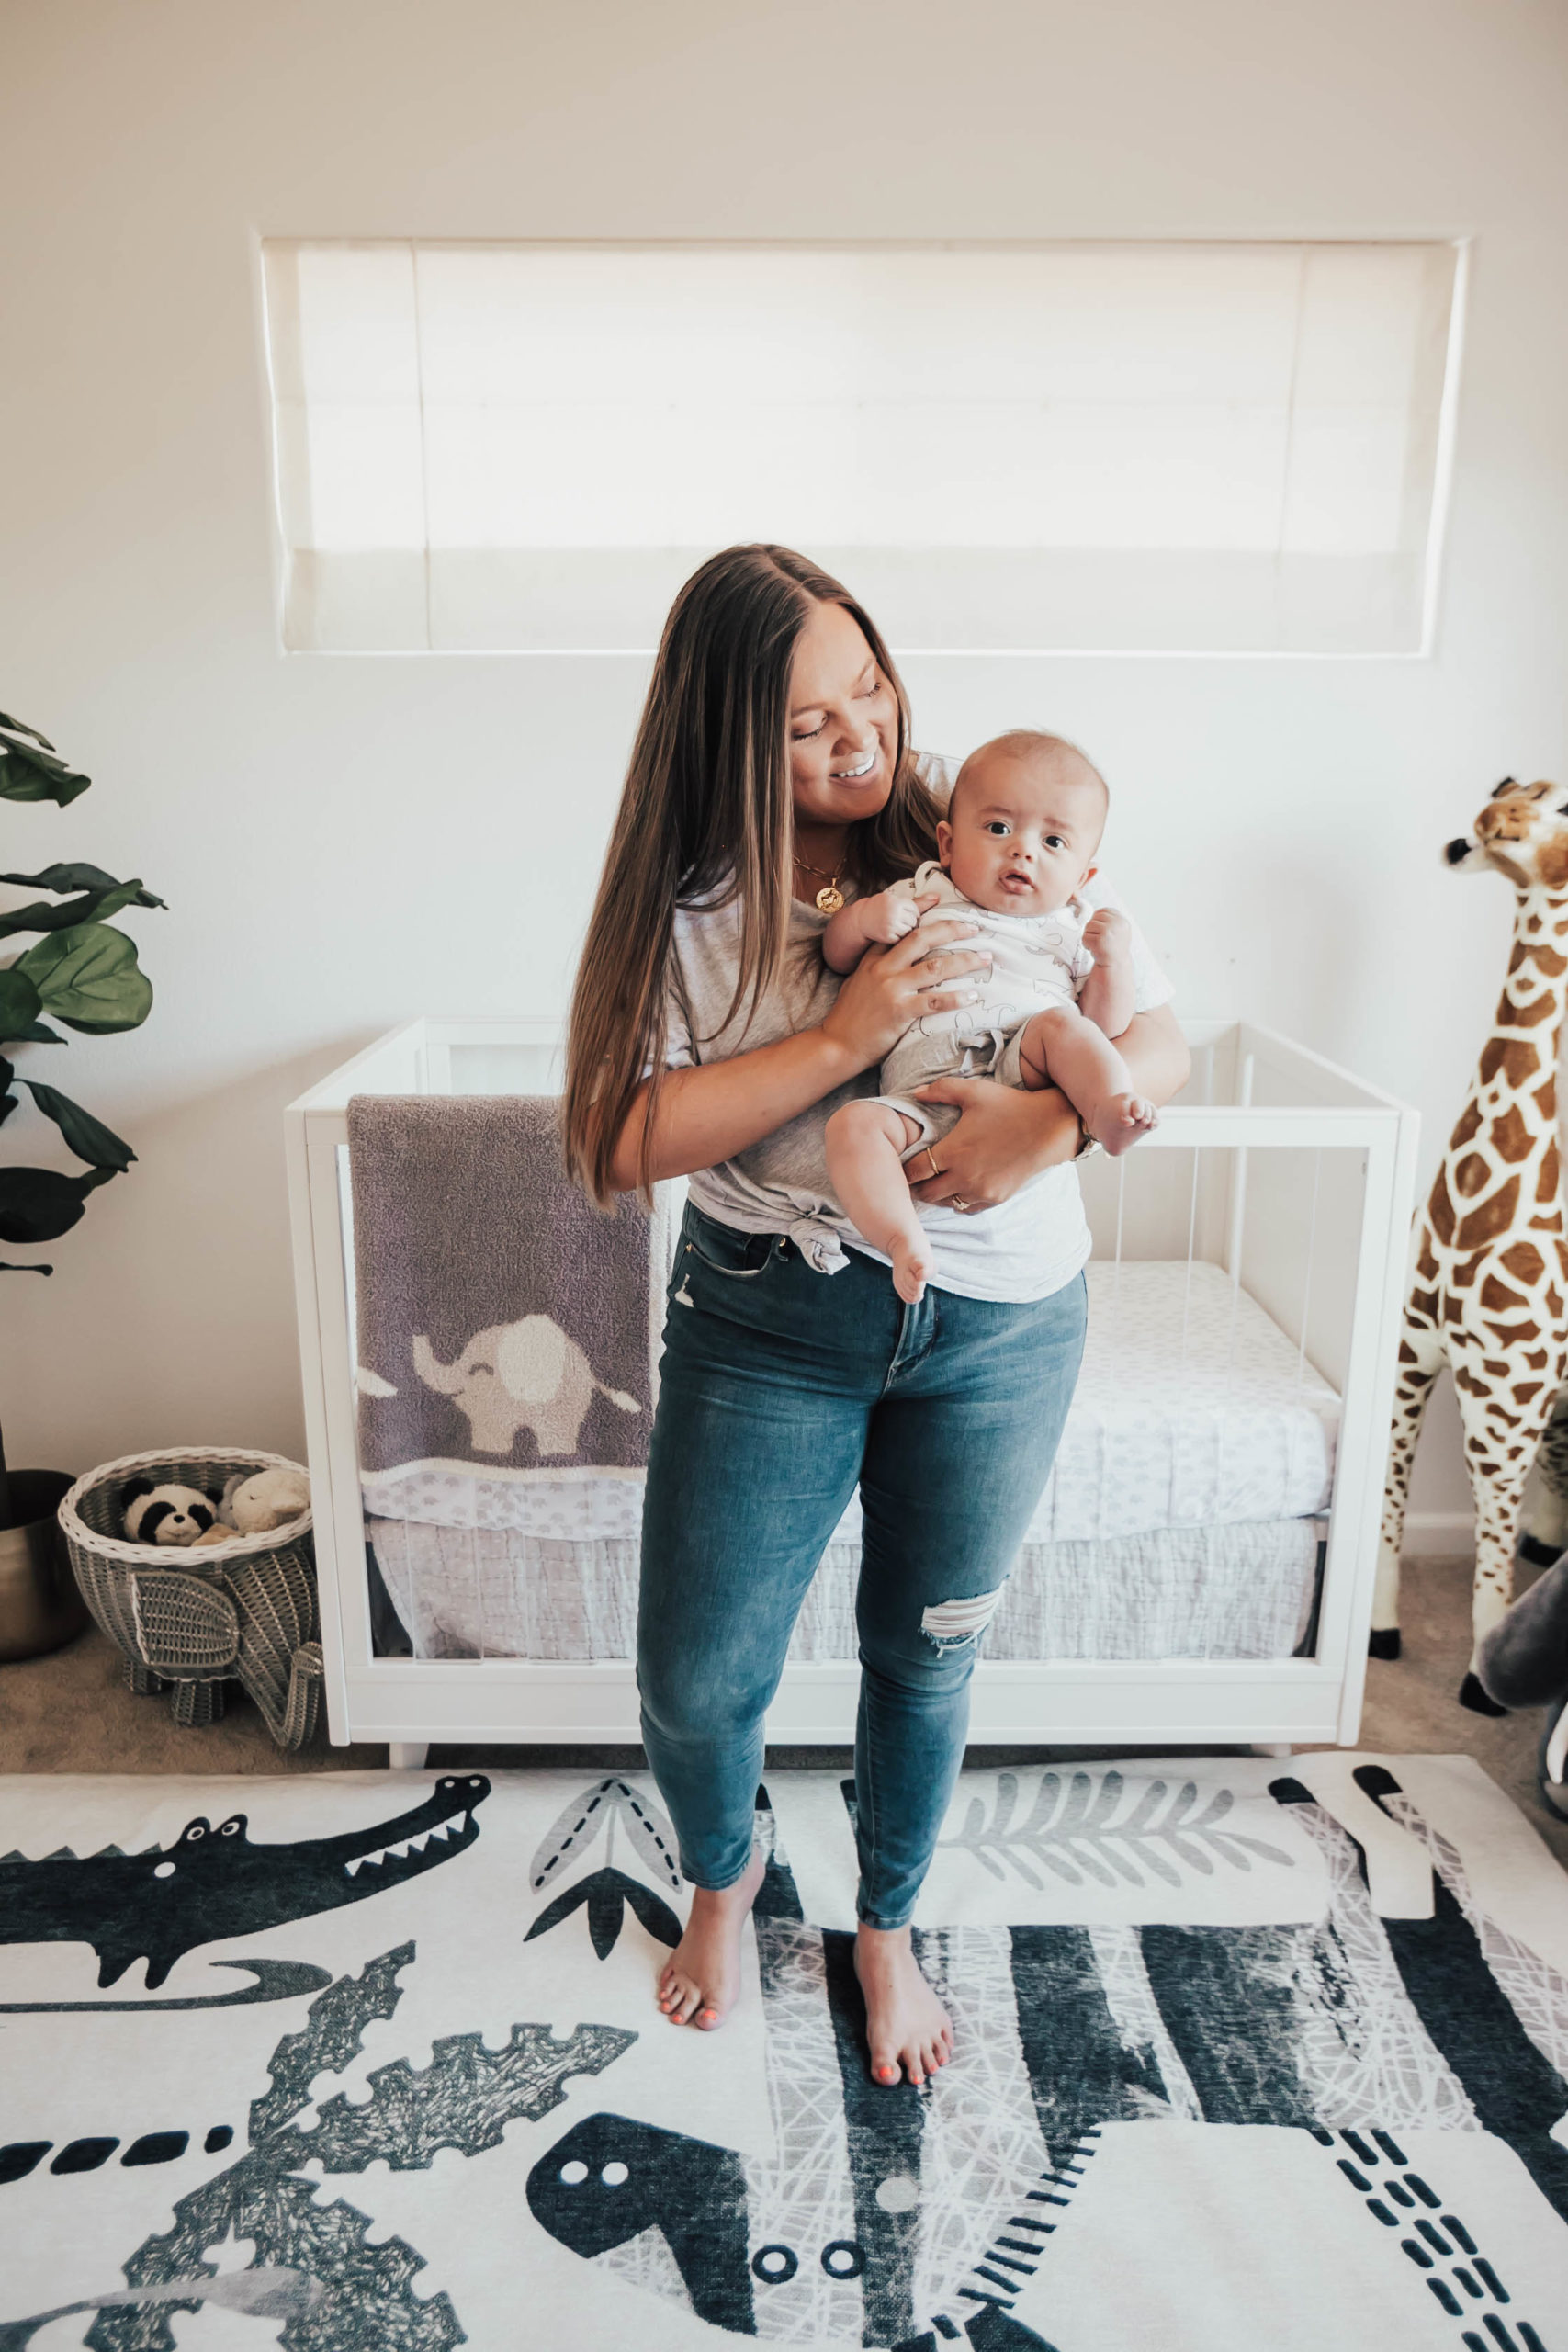 Reno Blogger, Ashley Zeal Hurd, from The Ashley & Emily blog shares Baby Joe's Nursery reveal. See all of the items they chose and their most used products!